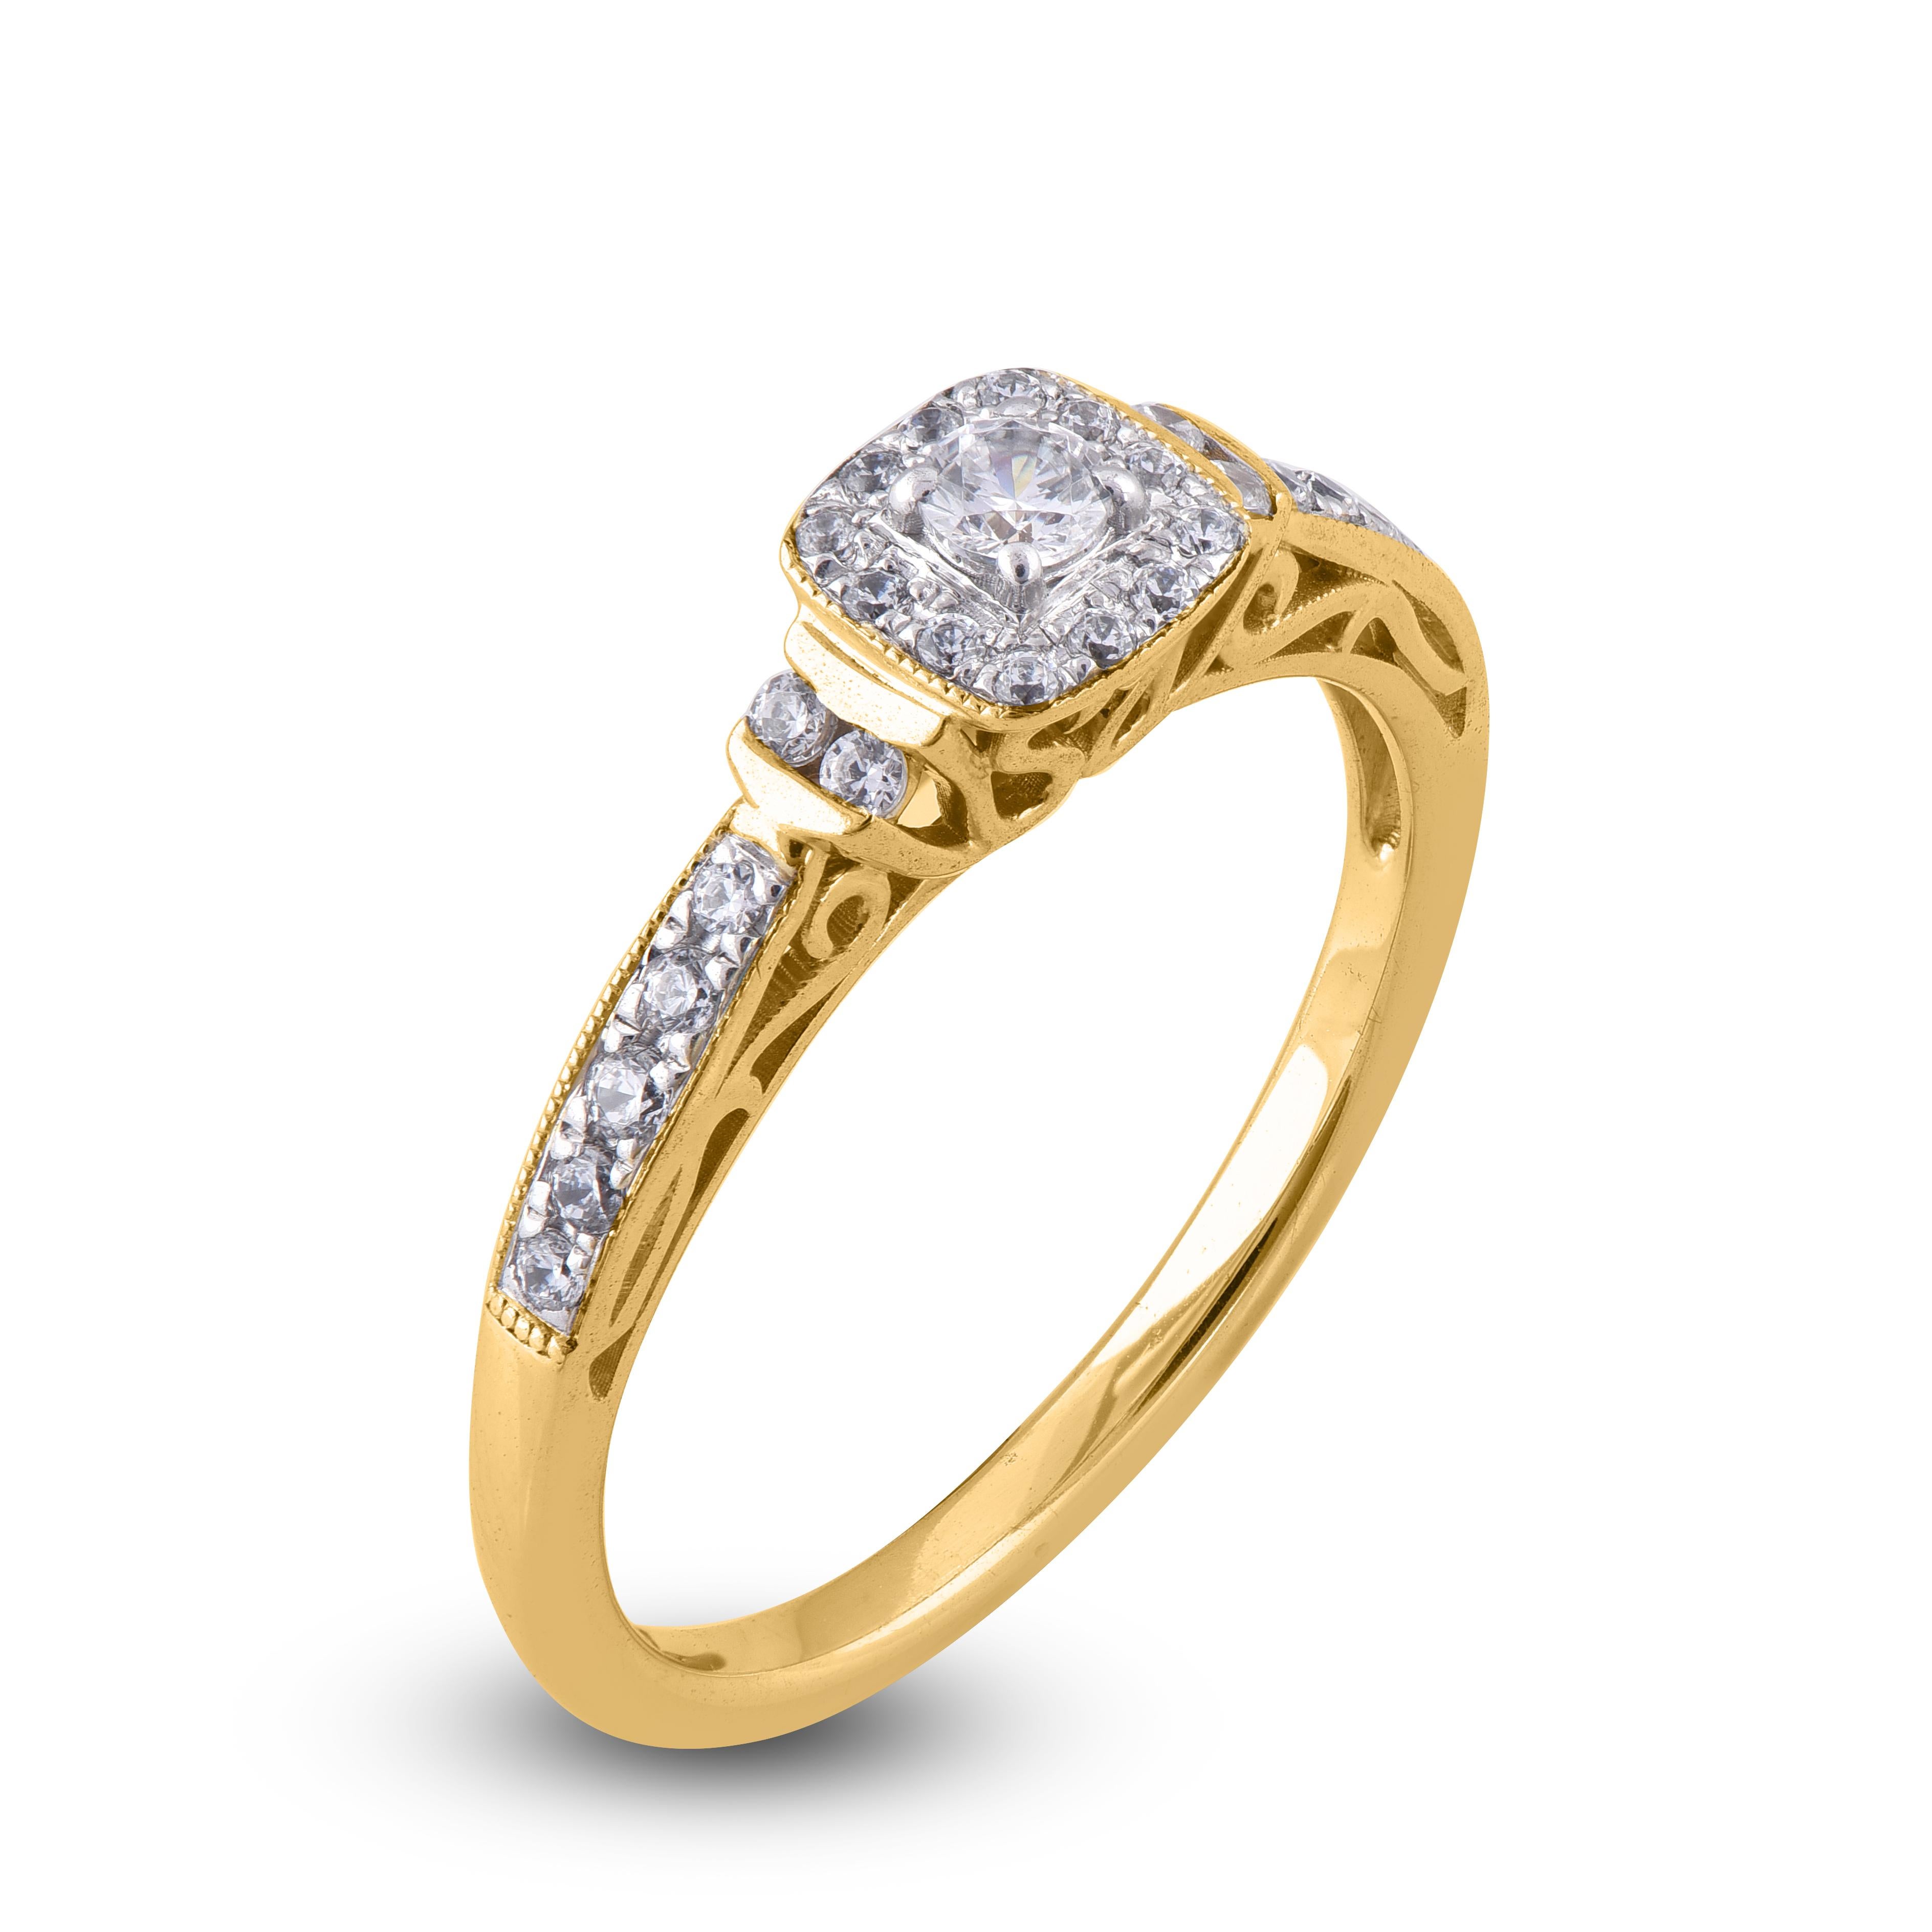 Give a touch of glamour to your fine jewelry collection with this diamond engagement ring. It features 0.25 ct diamond frame and shoulders embellished with 27 round cut diamond set in channel, prong and pave setting.The diamond are natural, not